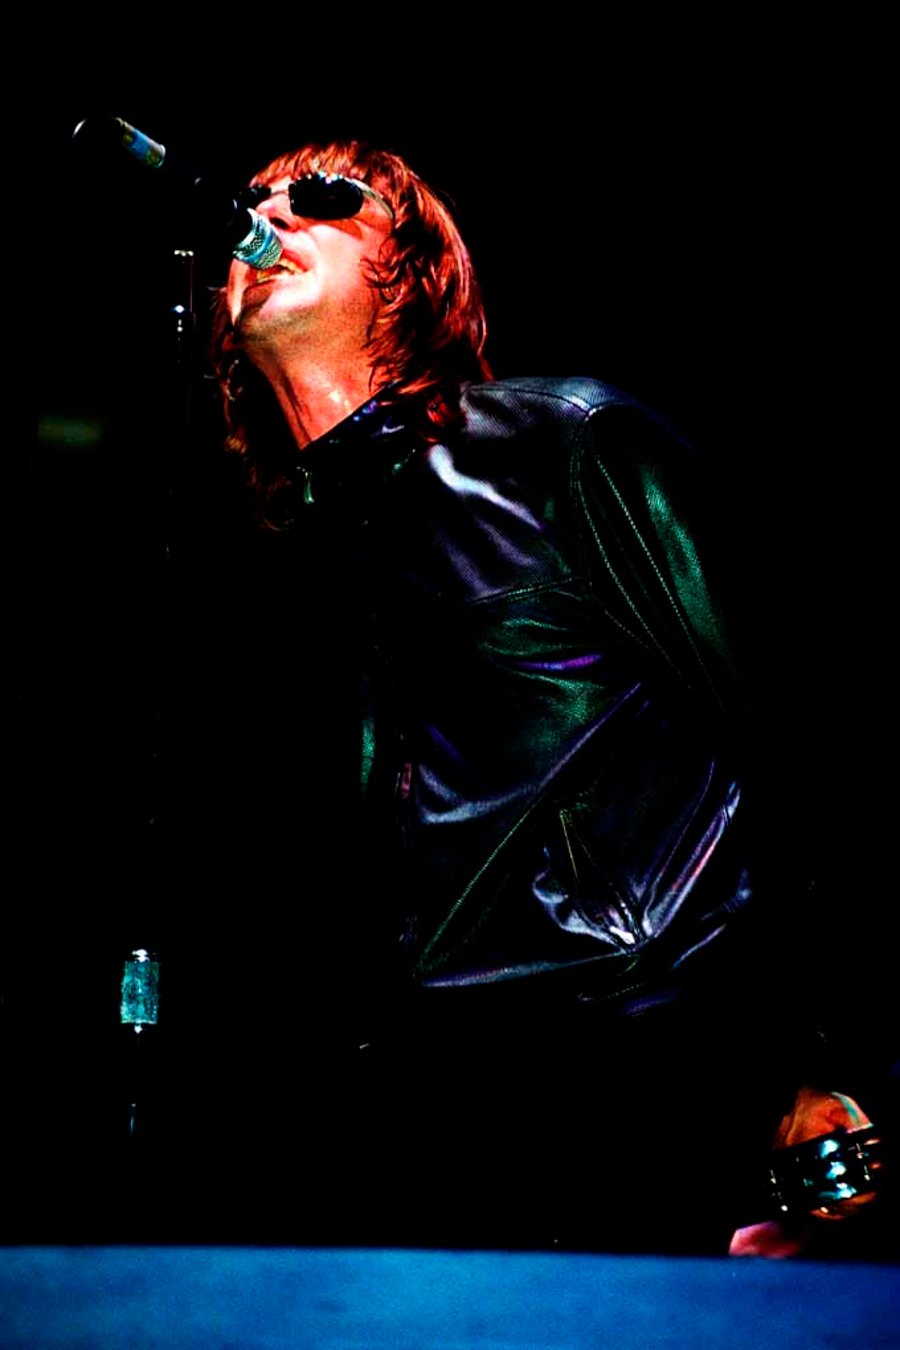 Liam Gallagher Oasis Reading Rock Festival Photograph Print